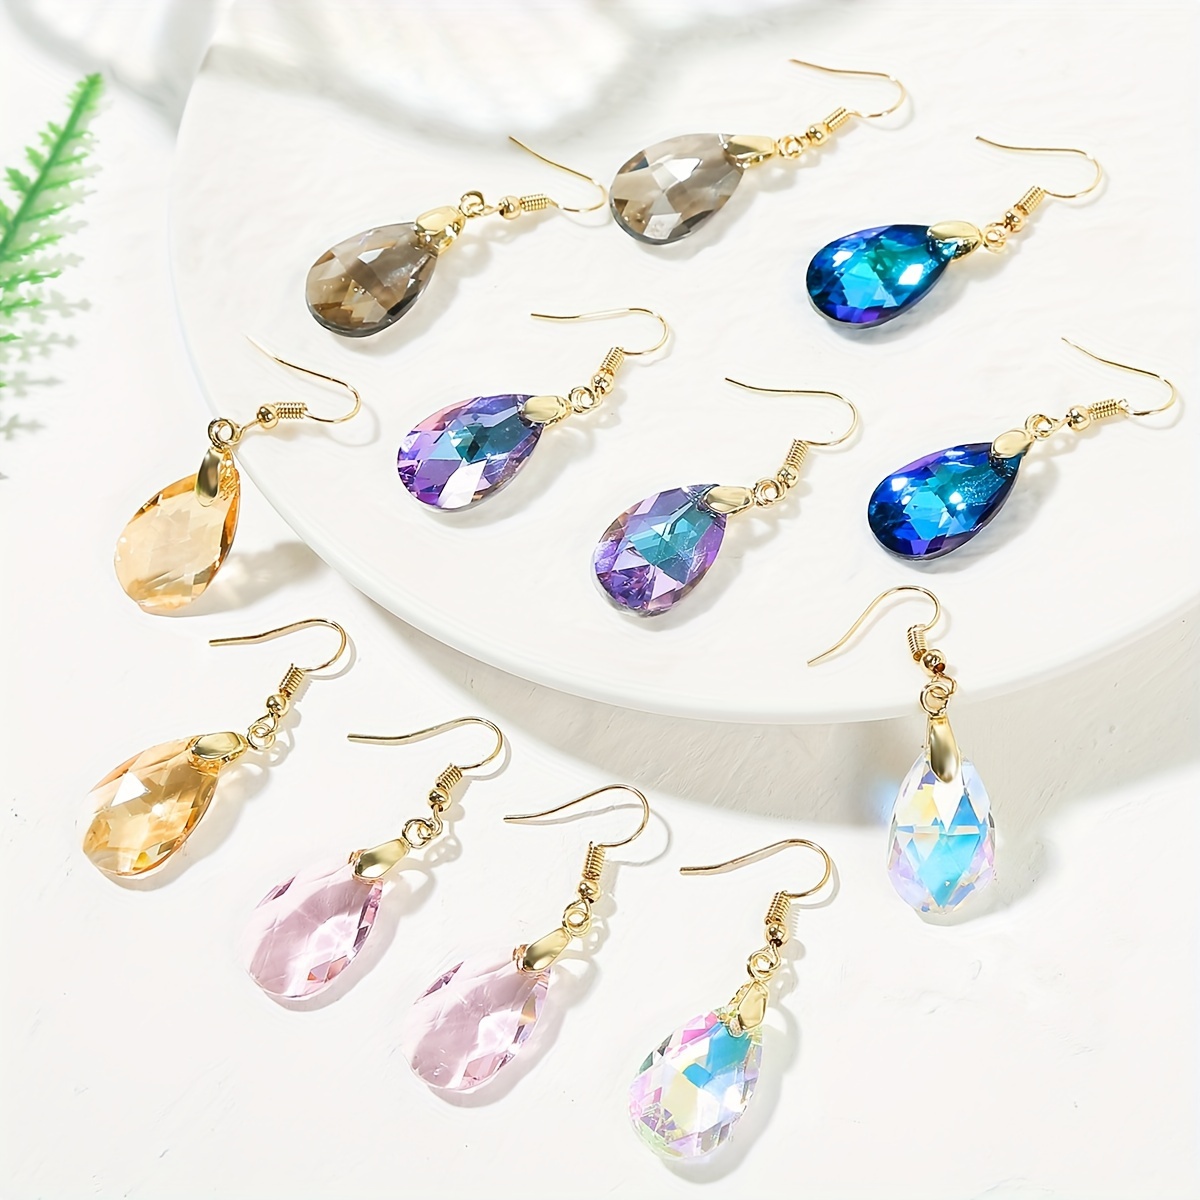 

6 Pairs Shiny Teardrop & Oval Shape Artificial Crystal Decor Long Dangle Earrings, Elegant Luxury Style Drop Jewelry Trendy Women Girls, For Valentine's Day, Mother's Day, Birthday Gifts